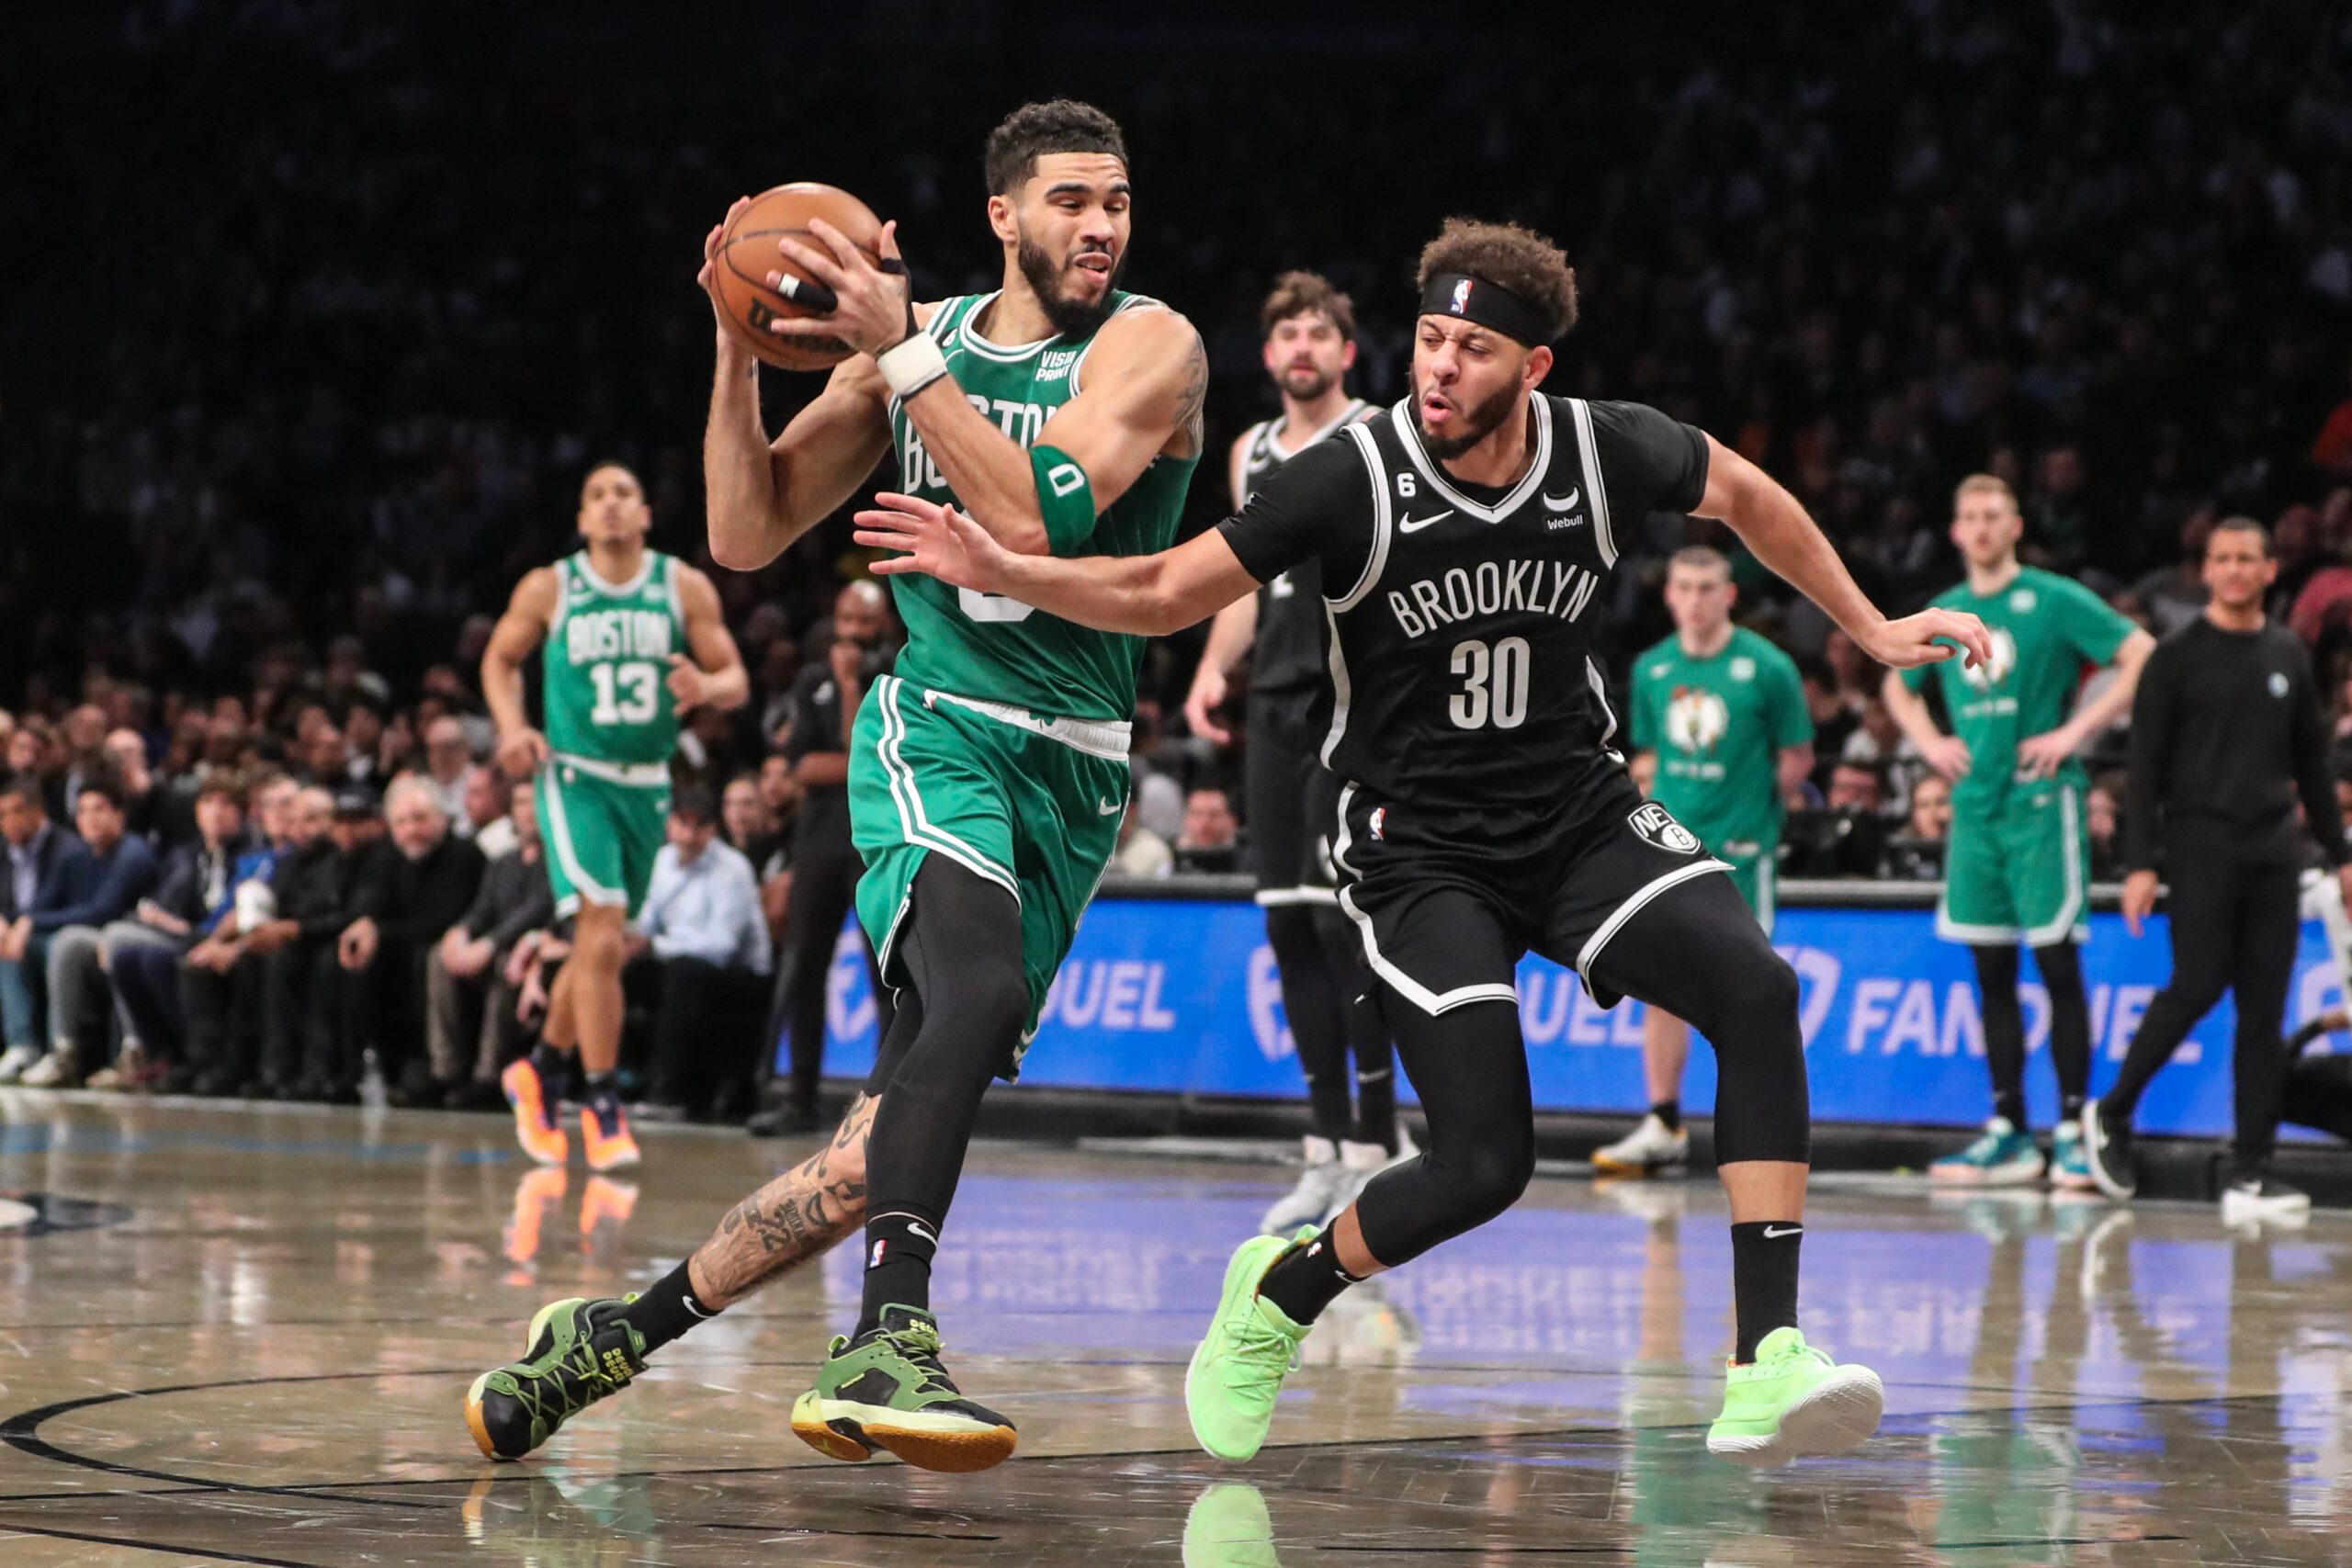 Celtics win close game in Eastern showdown with Nets